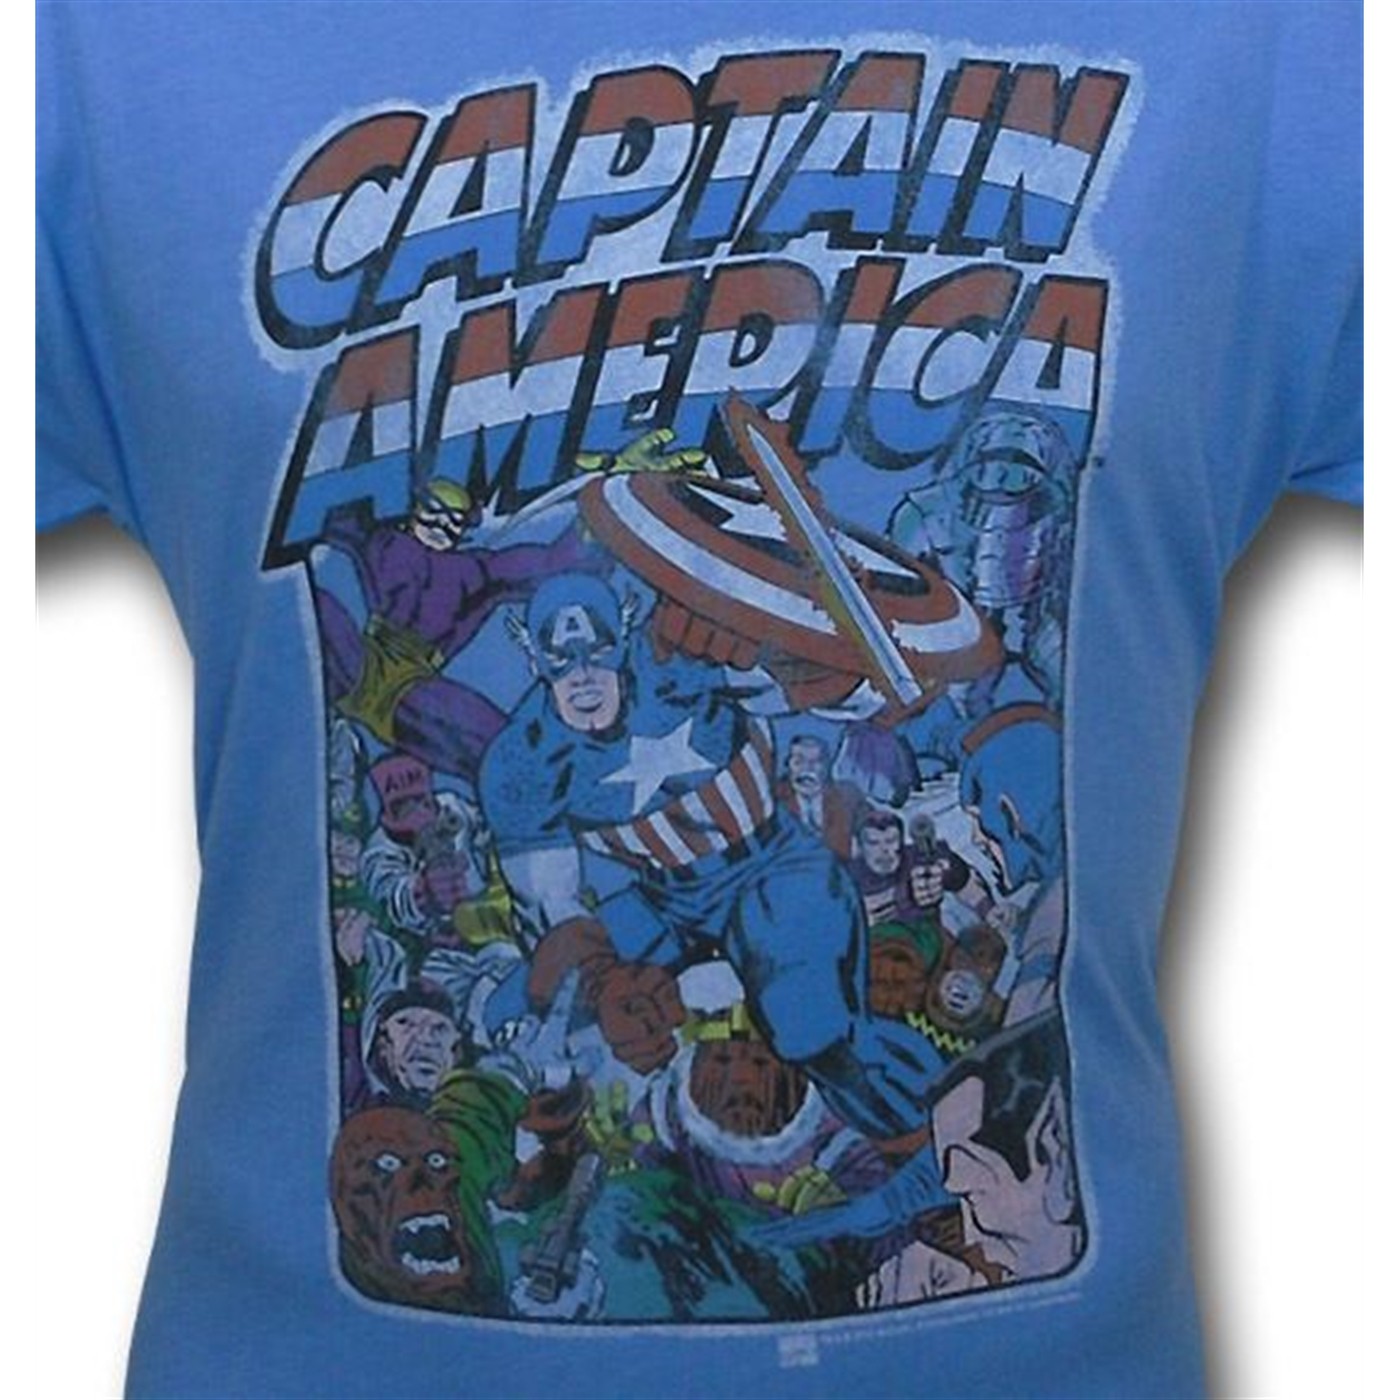 Captain America Wicked Mob Junk Food T-Shirt